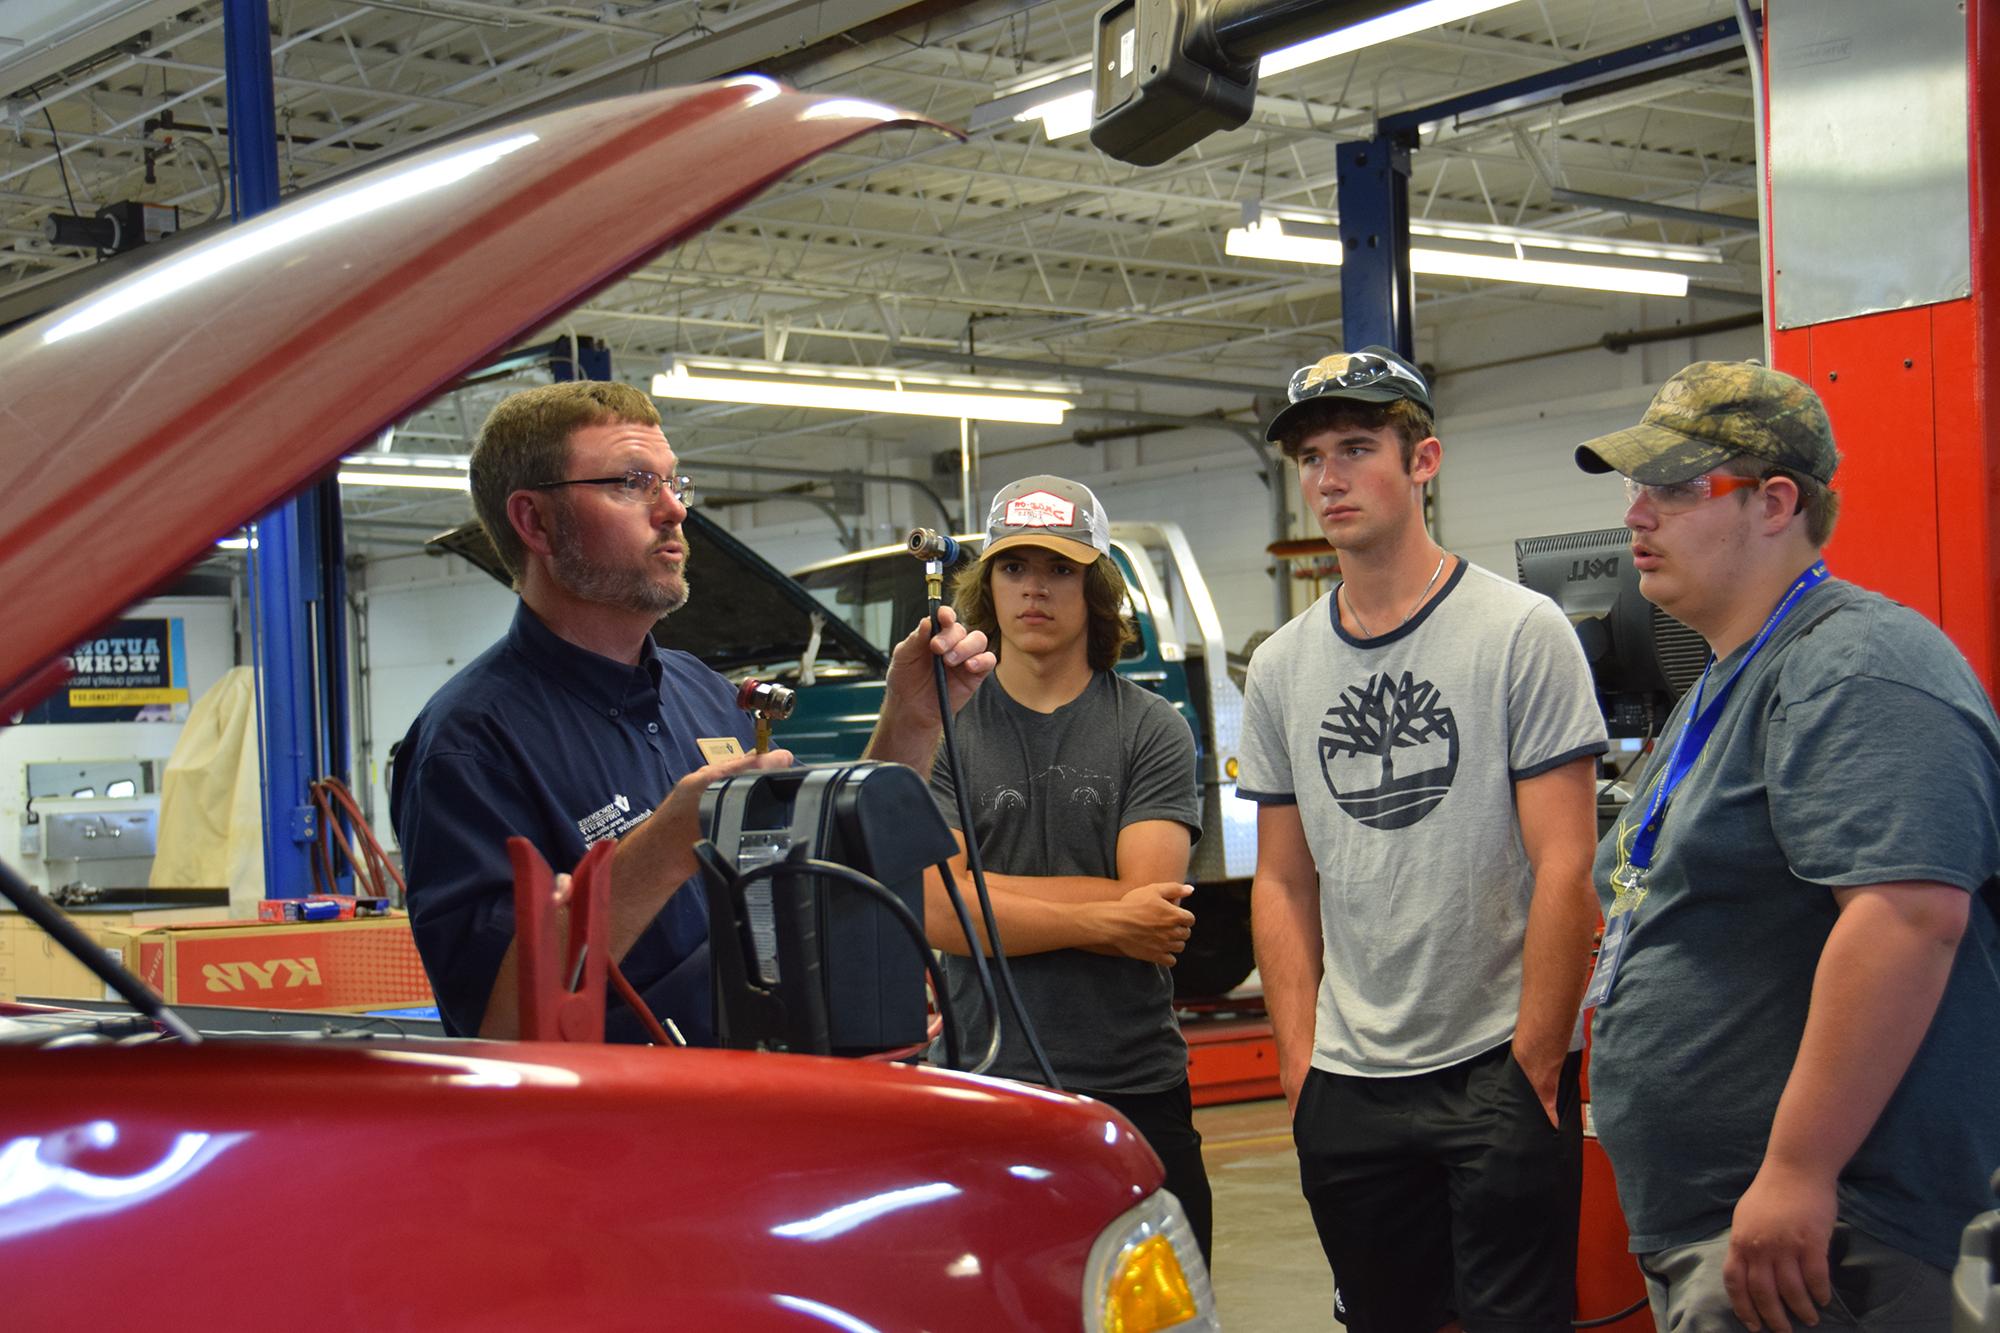 Automotive club students meet with their instructor